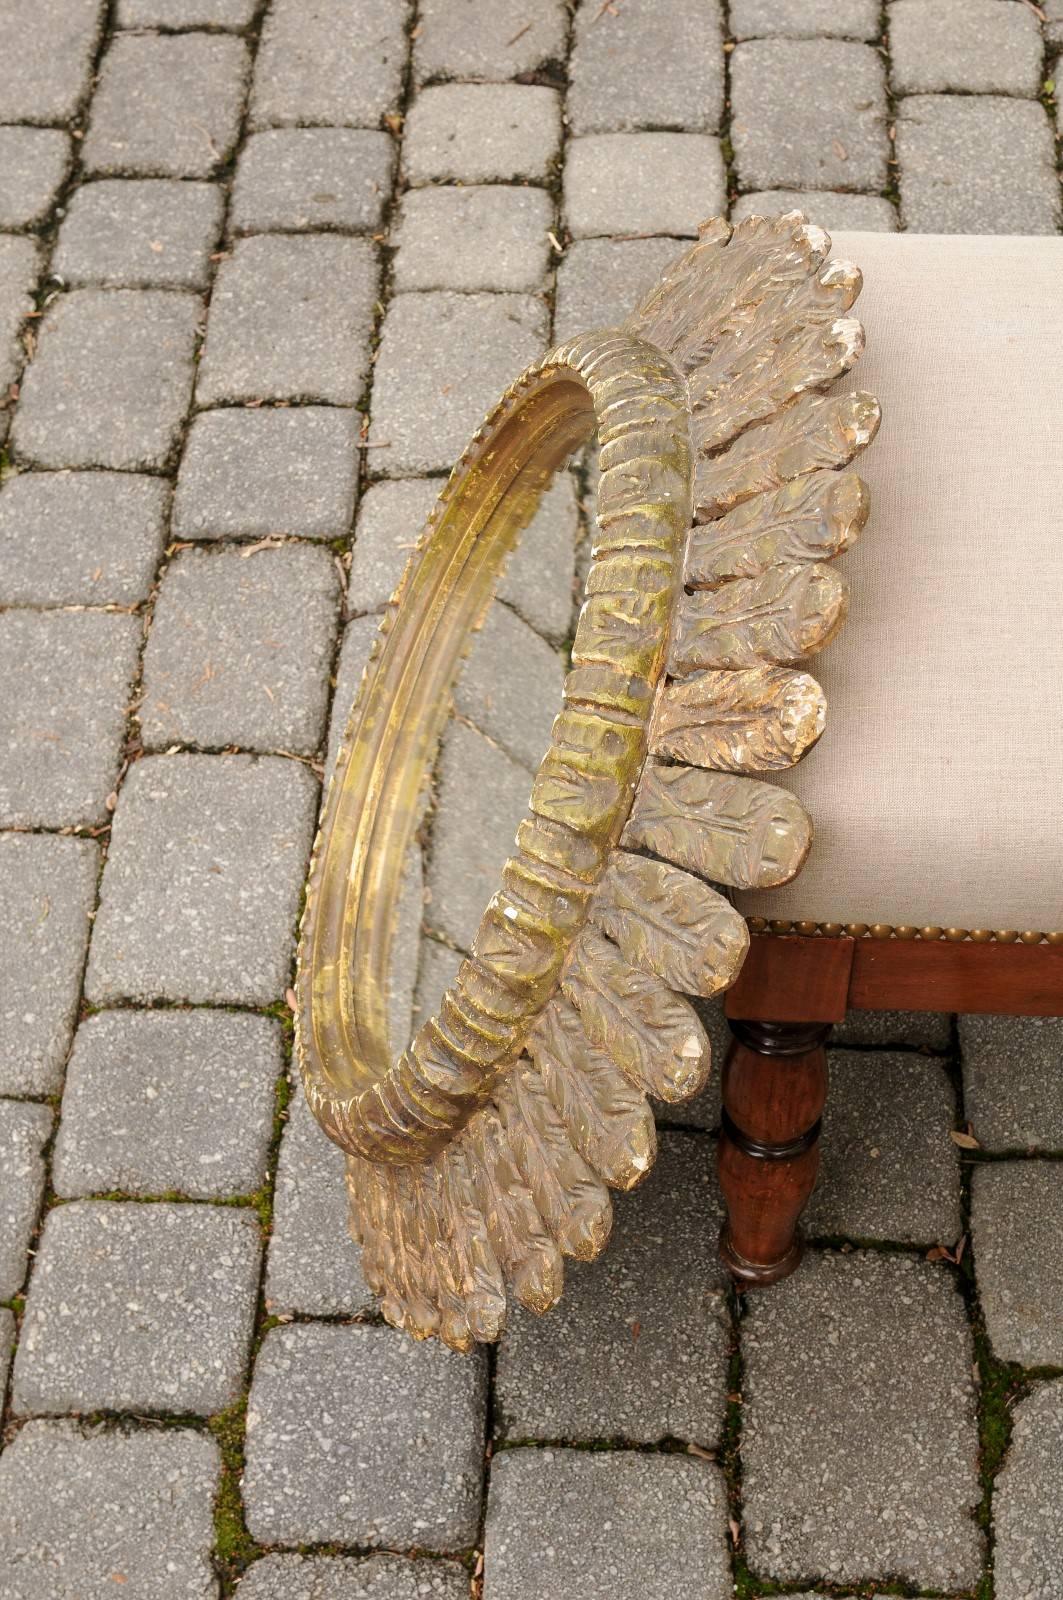 20th Century Italian Carved Giltwood Circular Mirror with Foliage Motifs from the 1950s